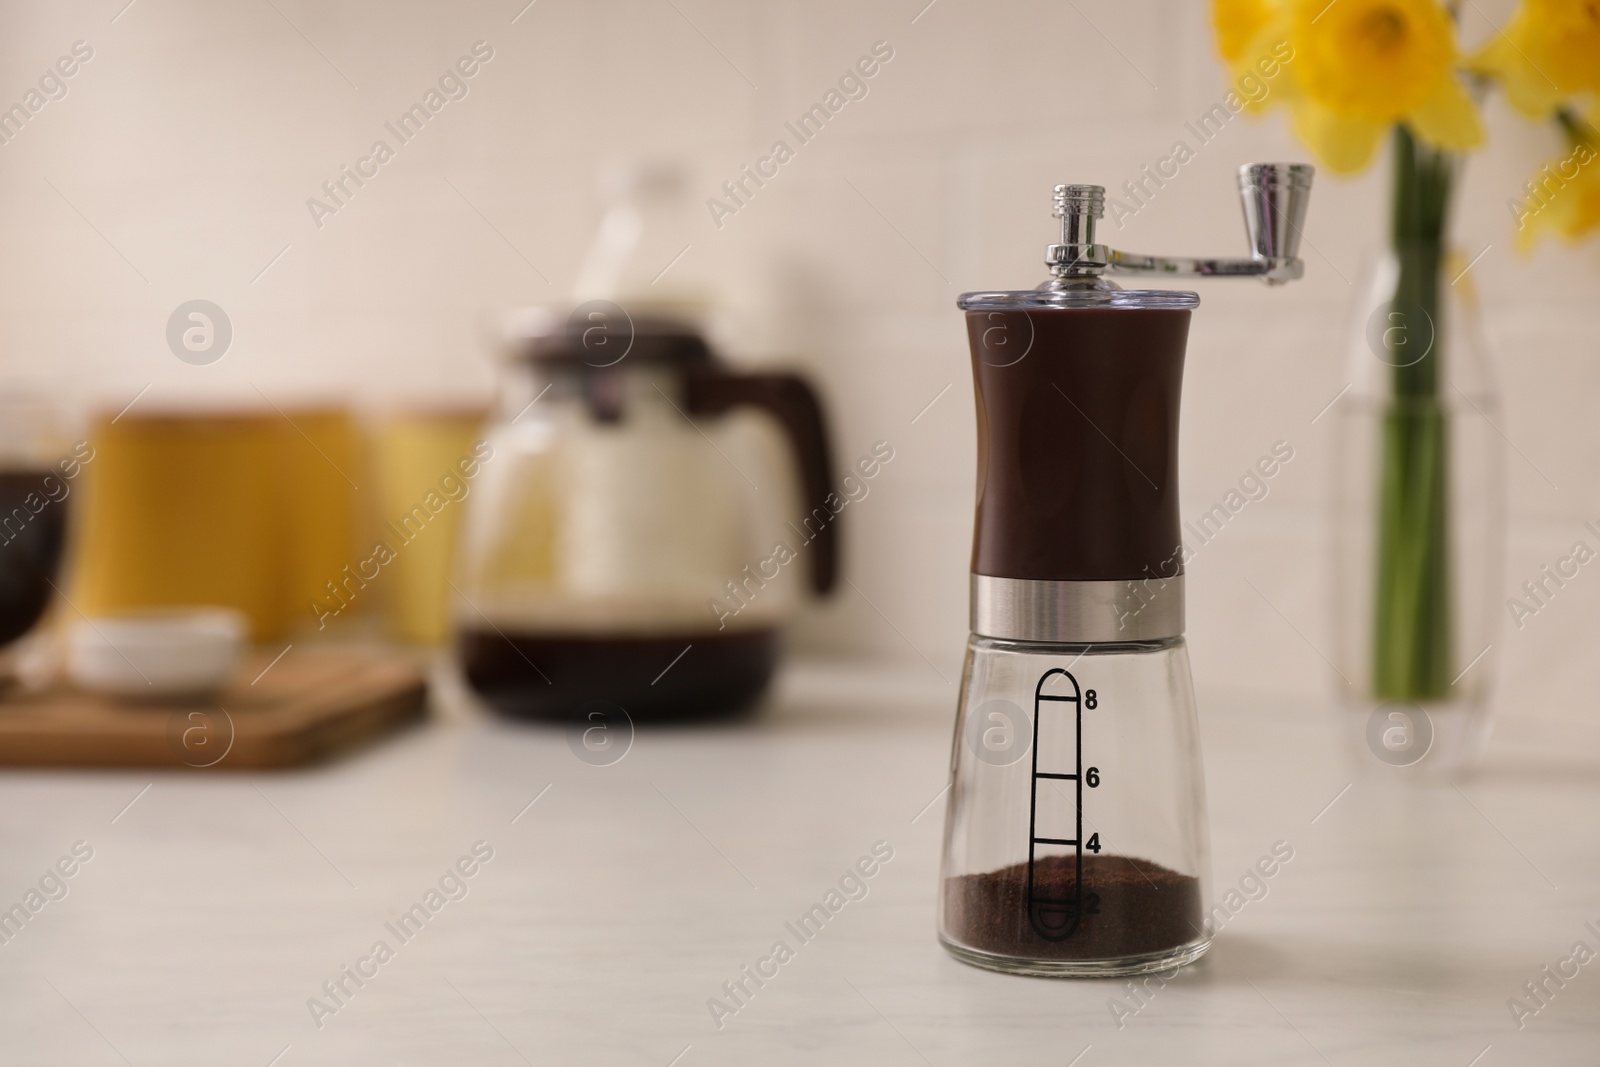 Photo of Manual coffee grinder on counter in kitchen